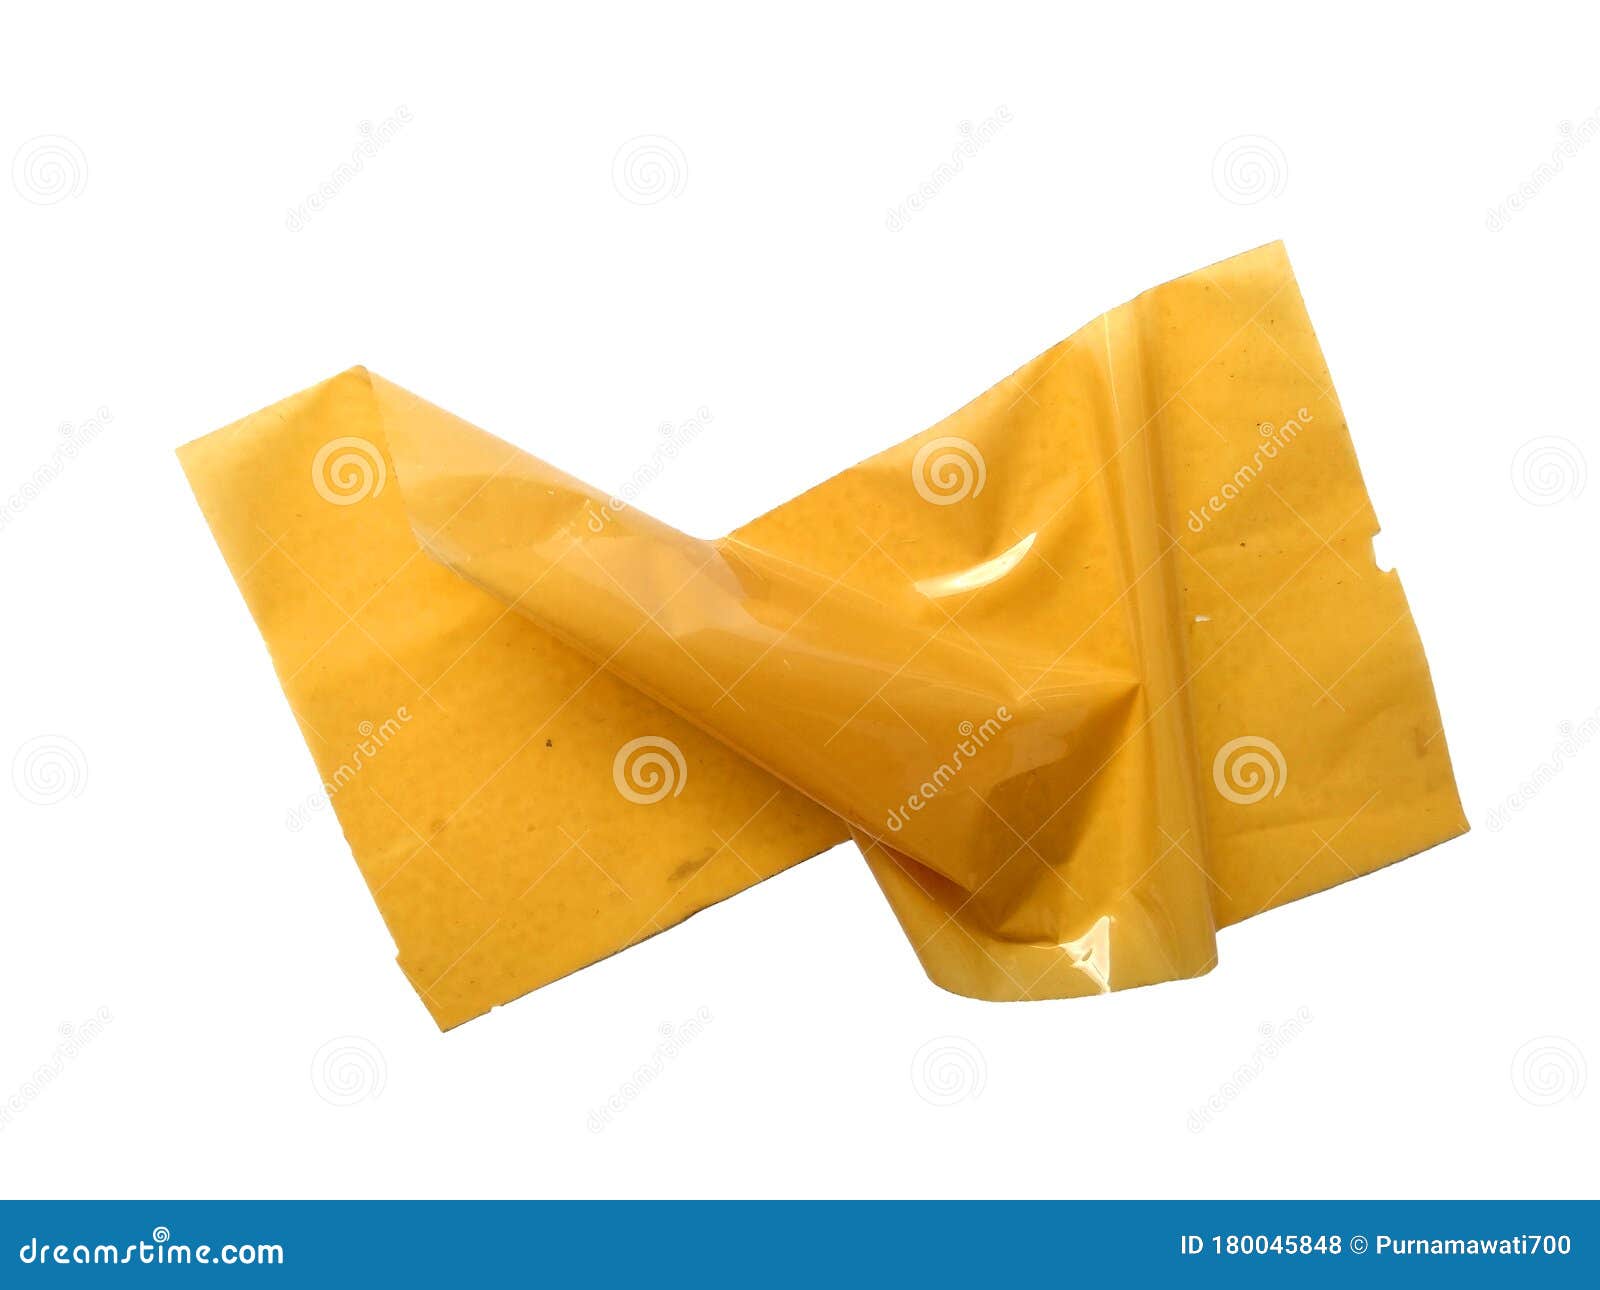 Adhesive Pieces or Yellow Duct Repair Tape Isolated on White Background ...